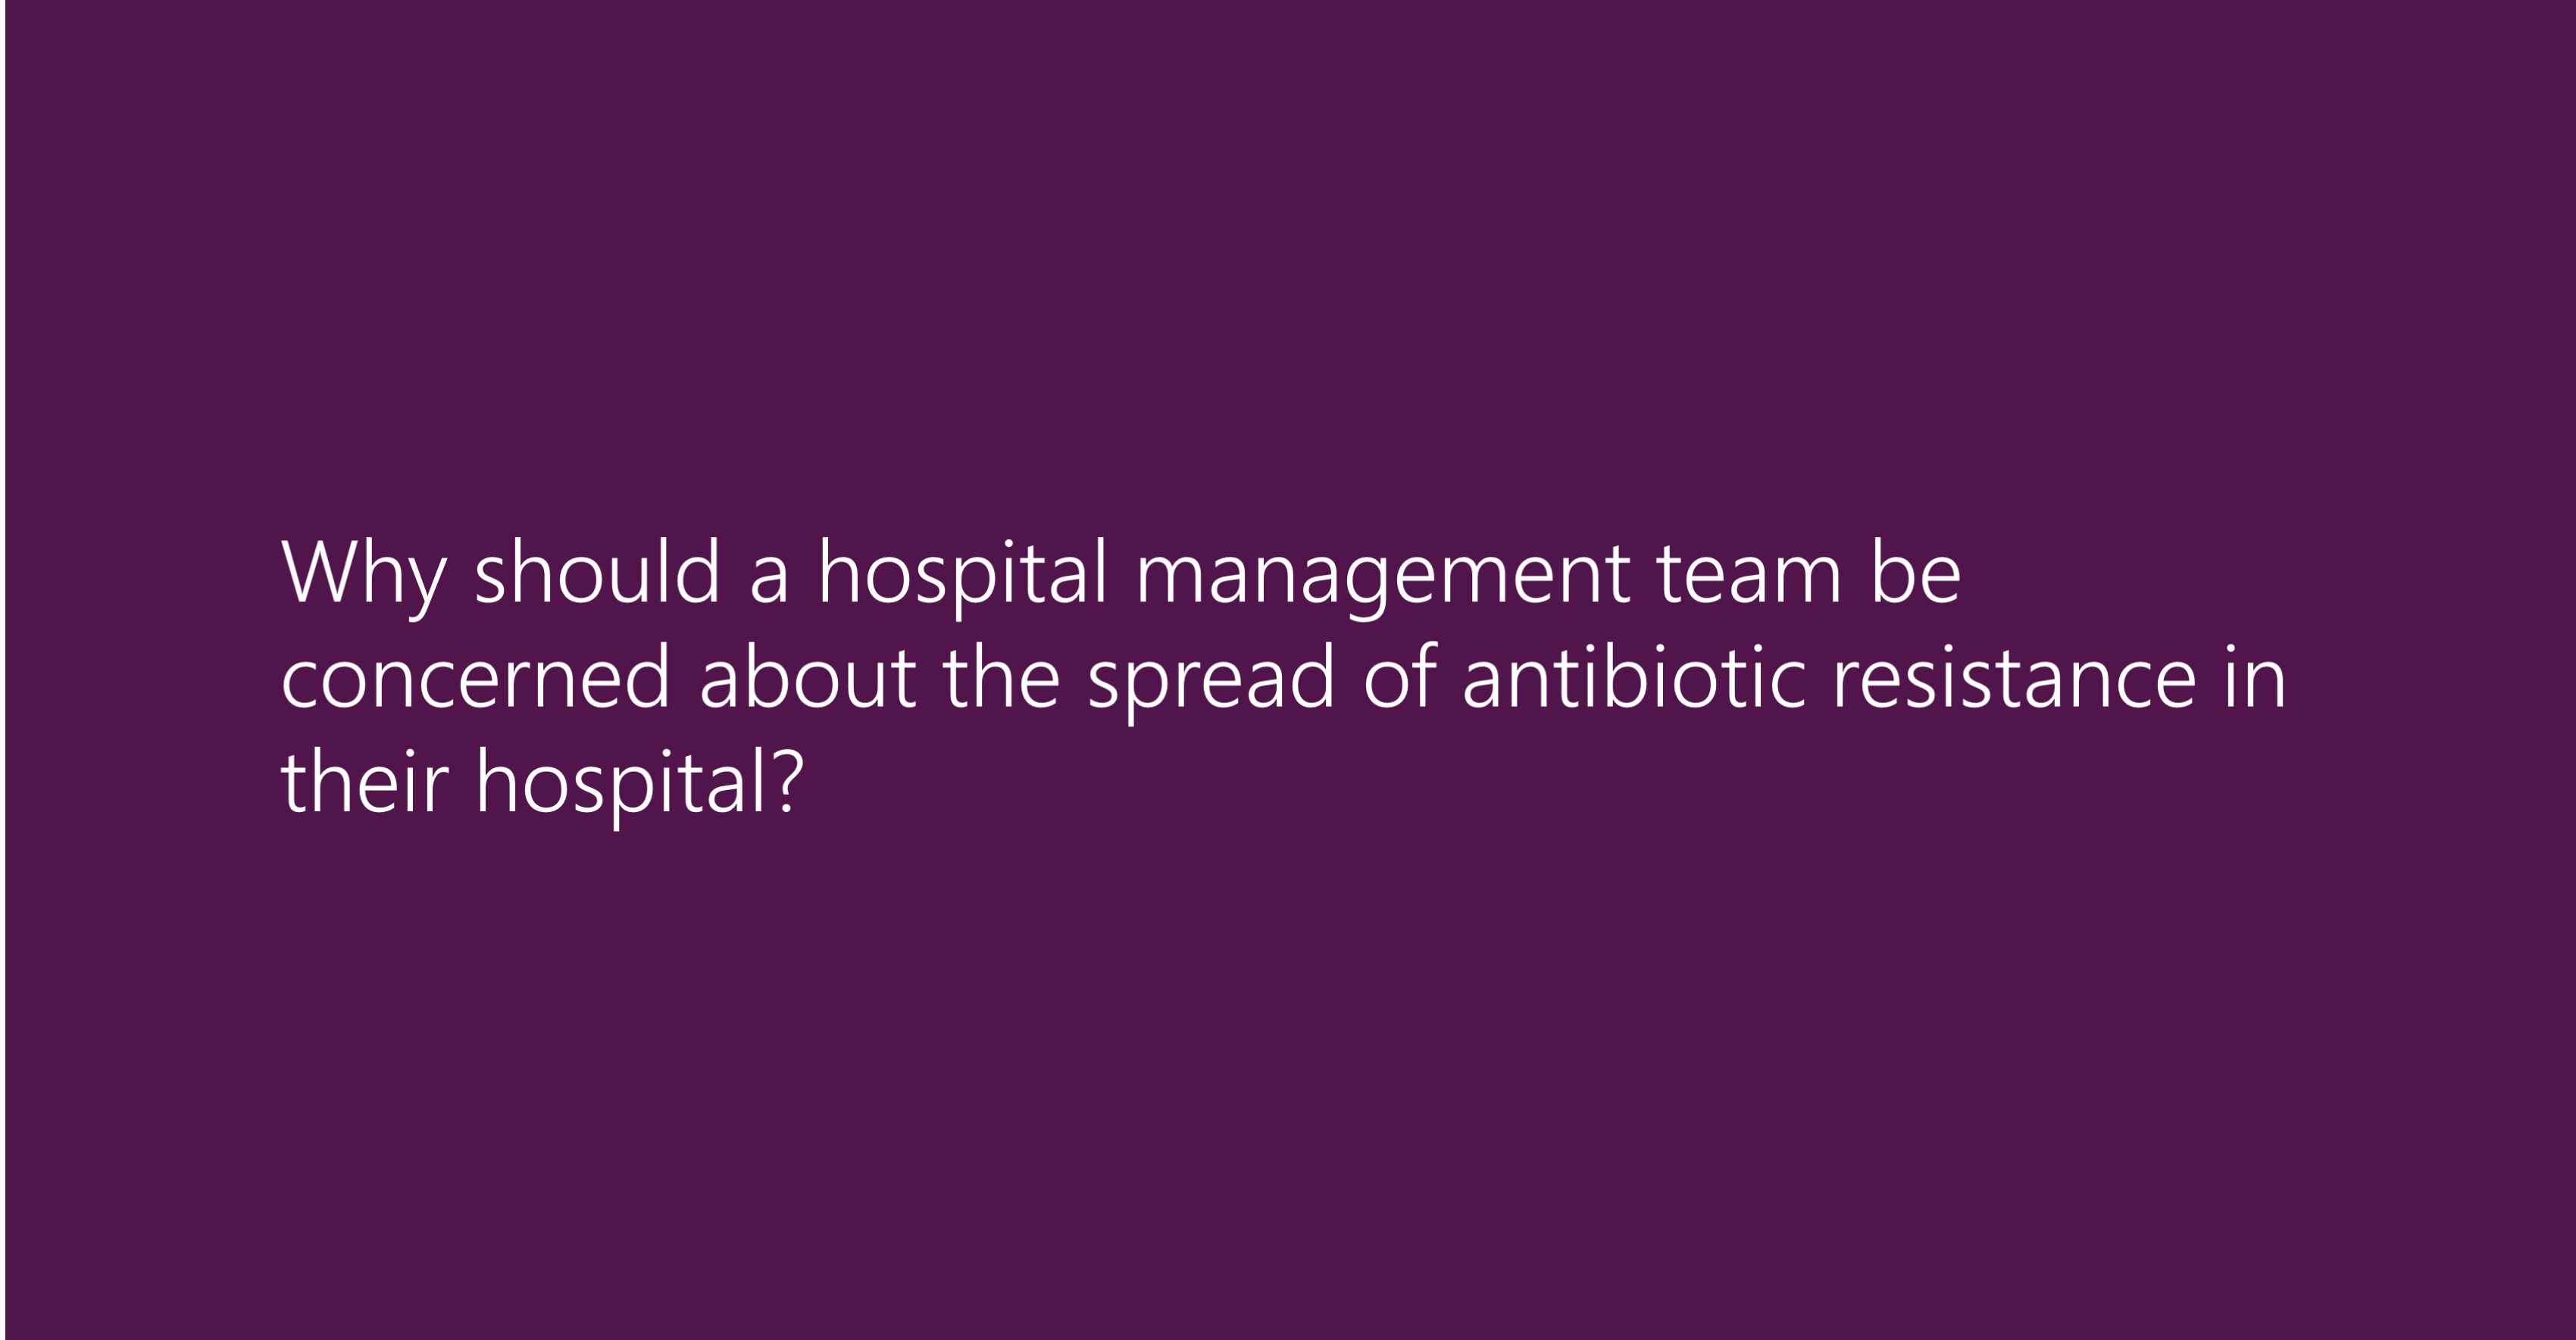 Why should a hospital management team be concerned about the spread of antibiotic resistance in their hospital?